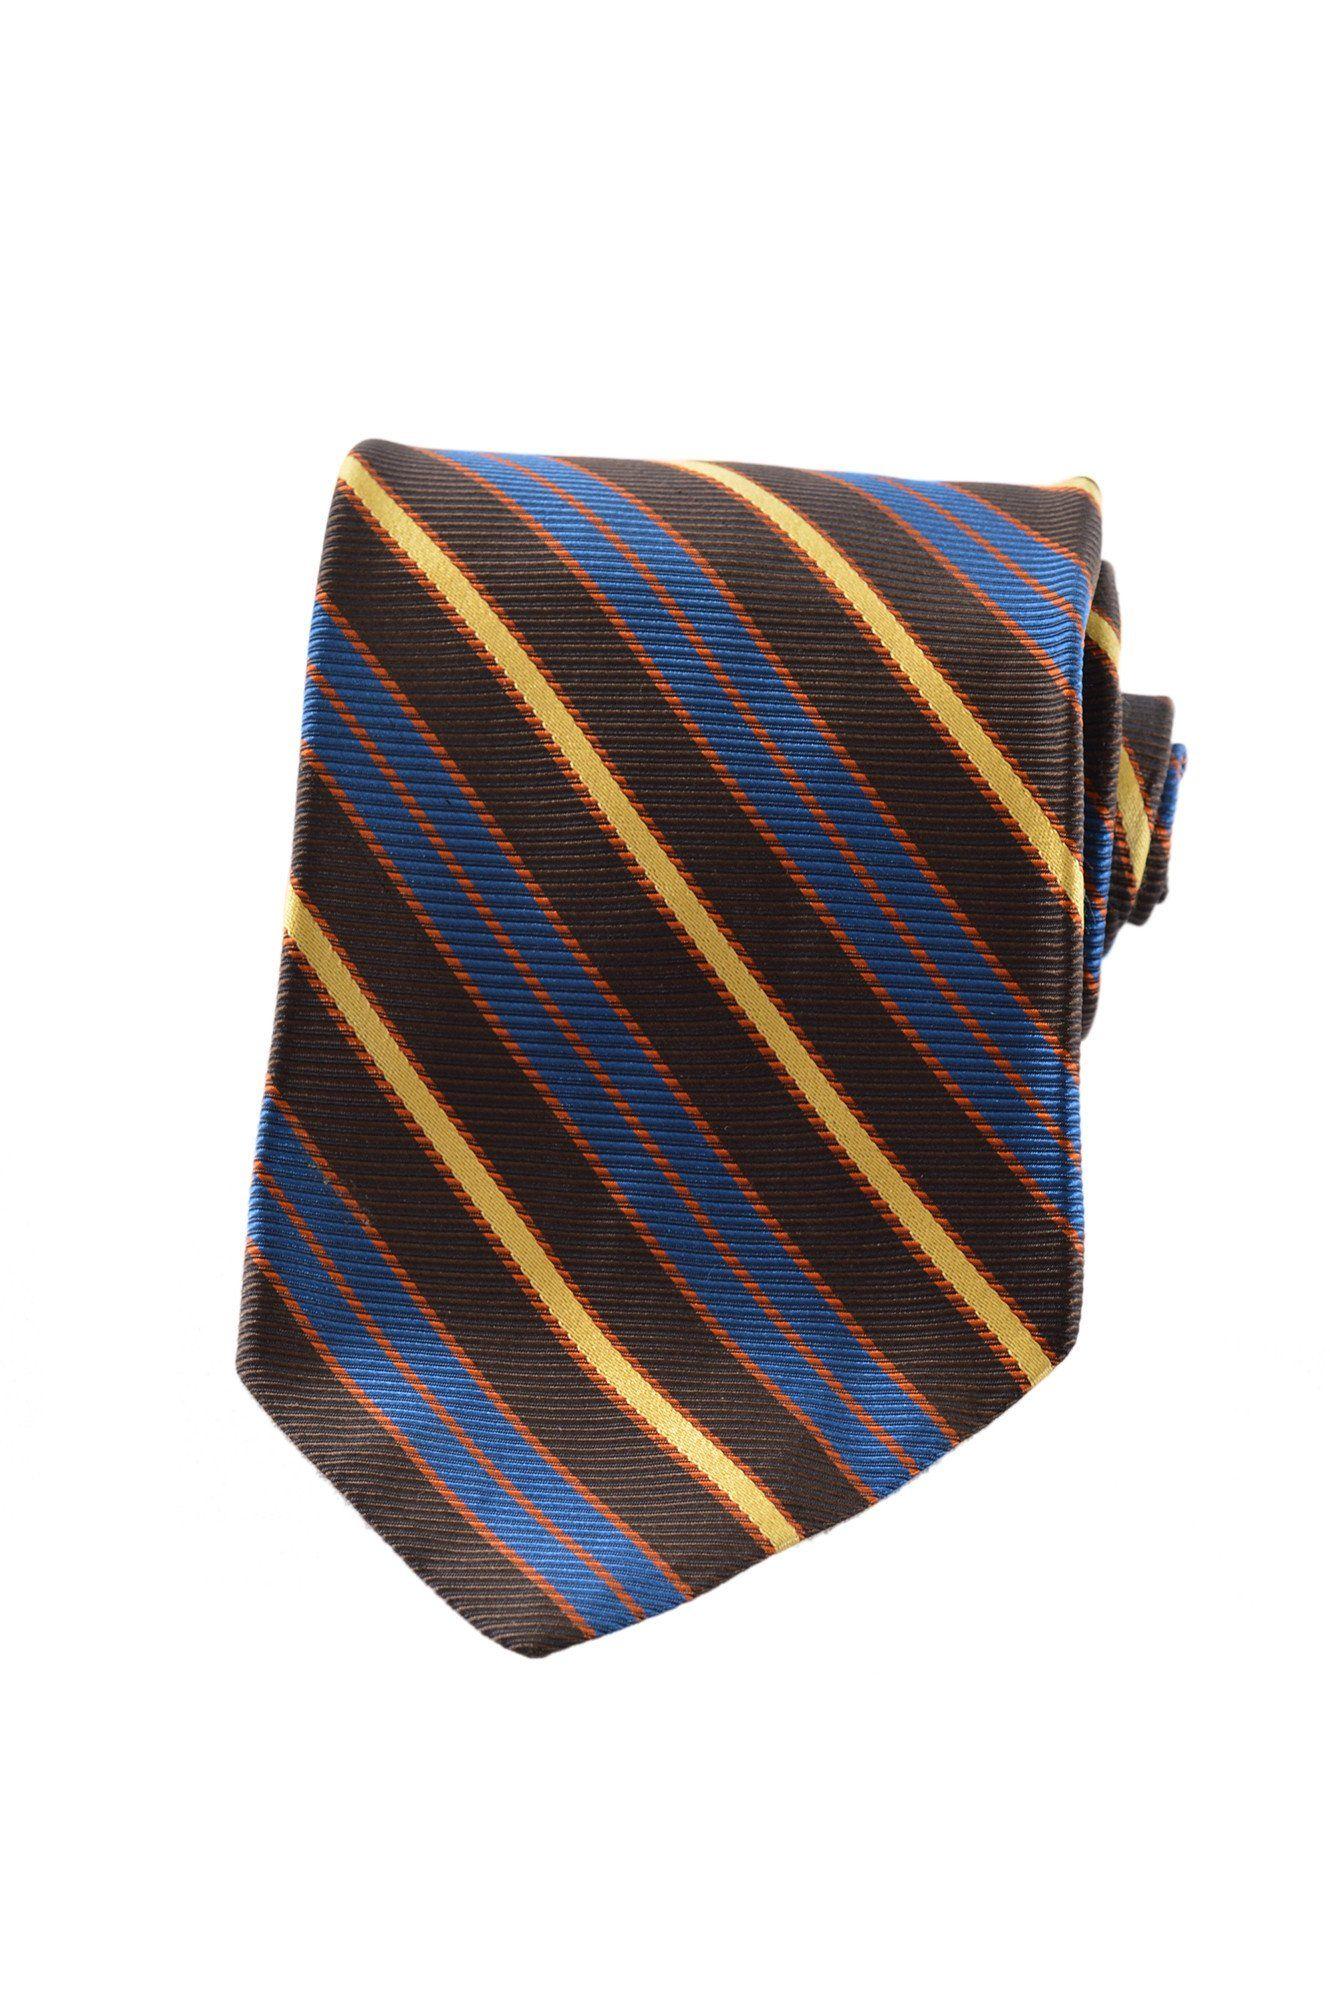 Striped Brown and Yellow Logo - Mens Christian Dior Vintage Brown Blue Yellow Striped Silk Tie ...